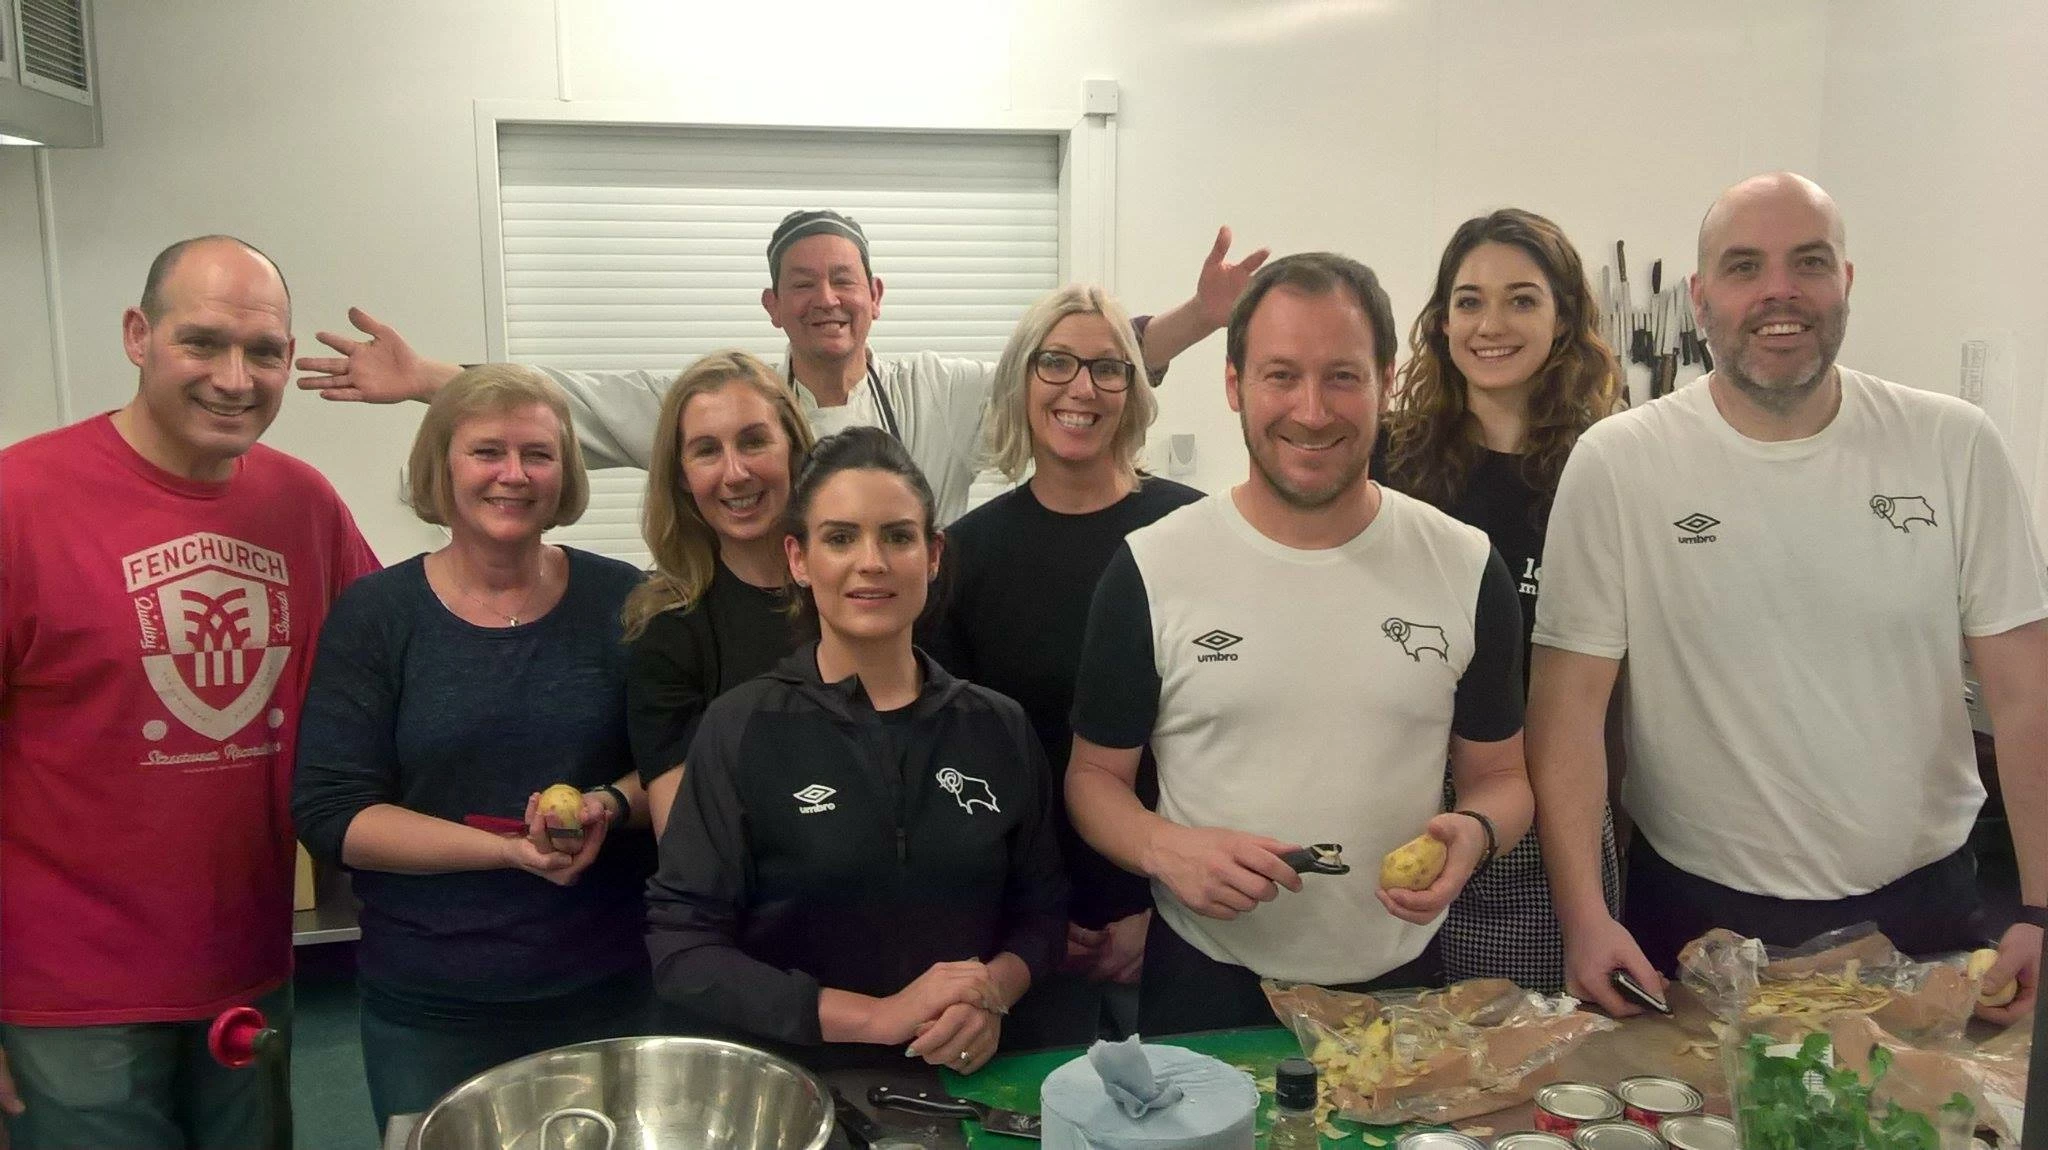 The Community Meal Team